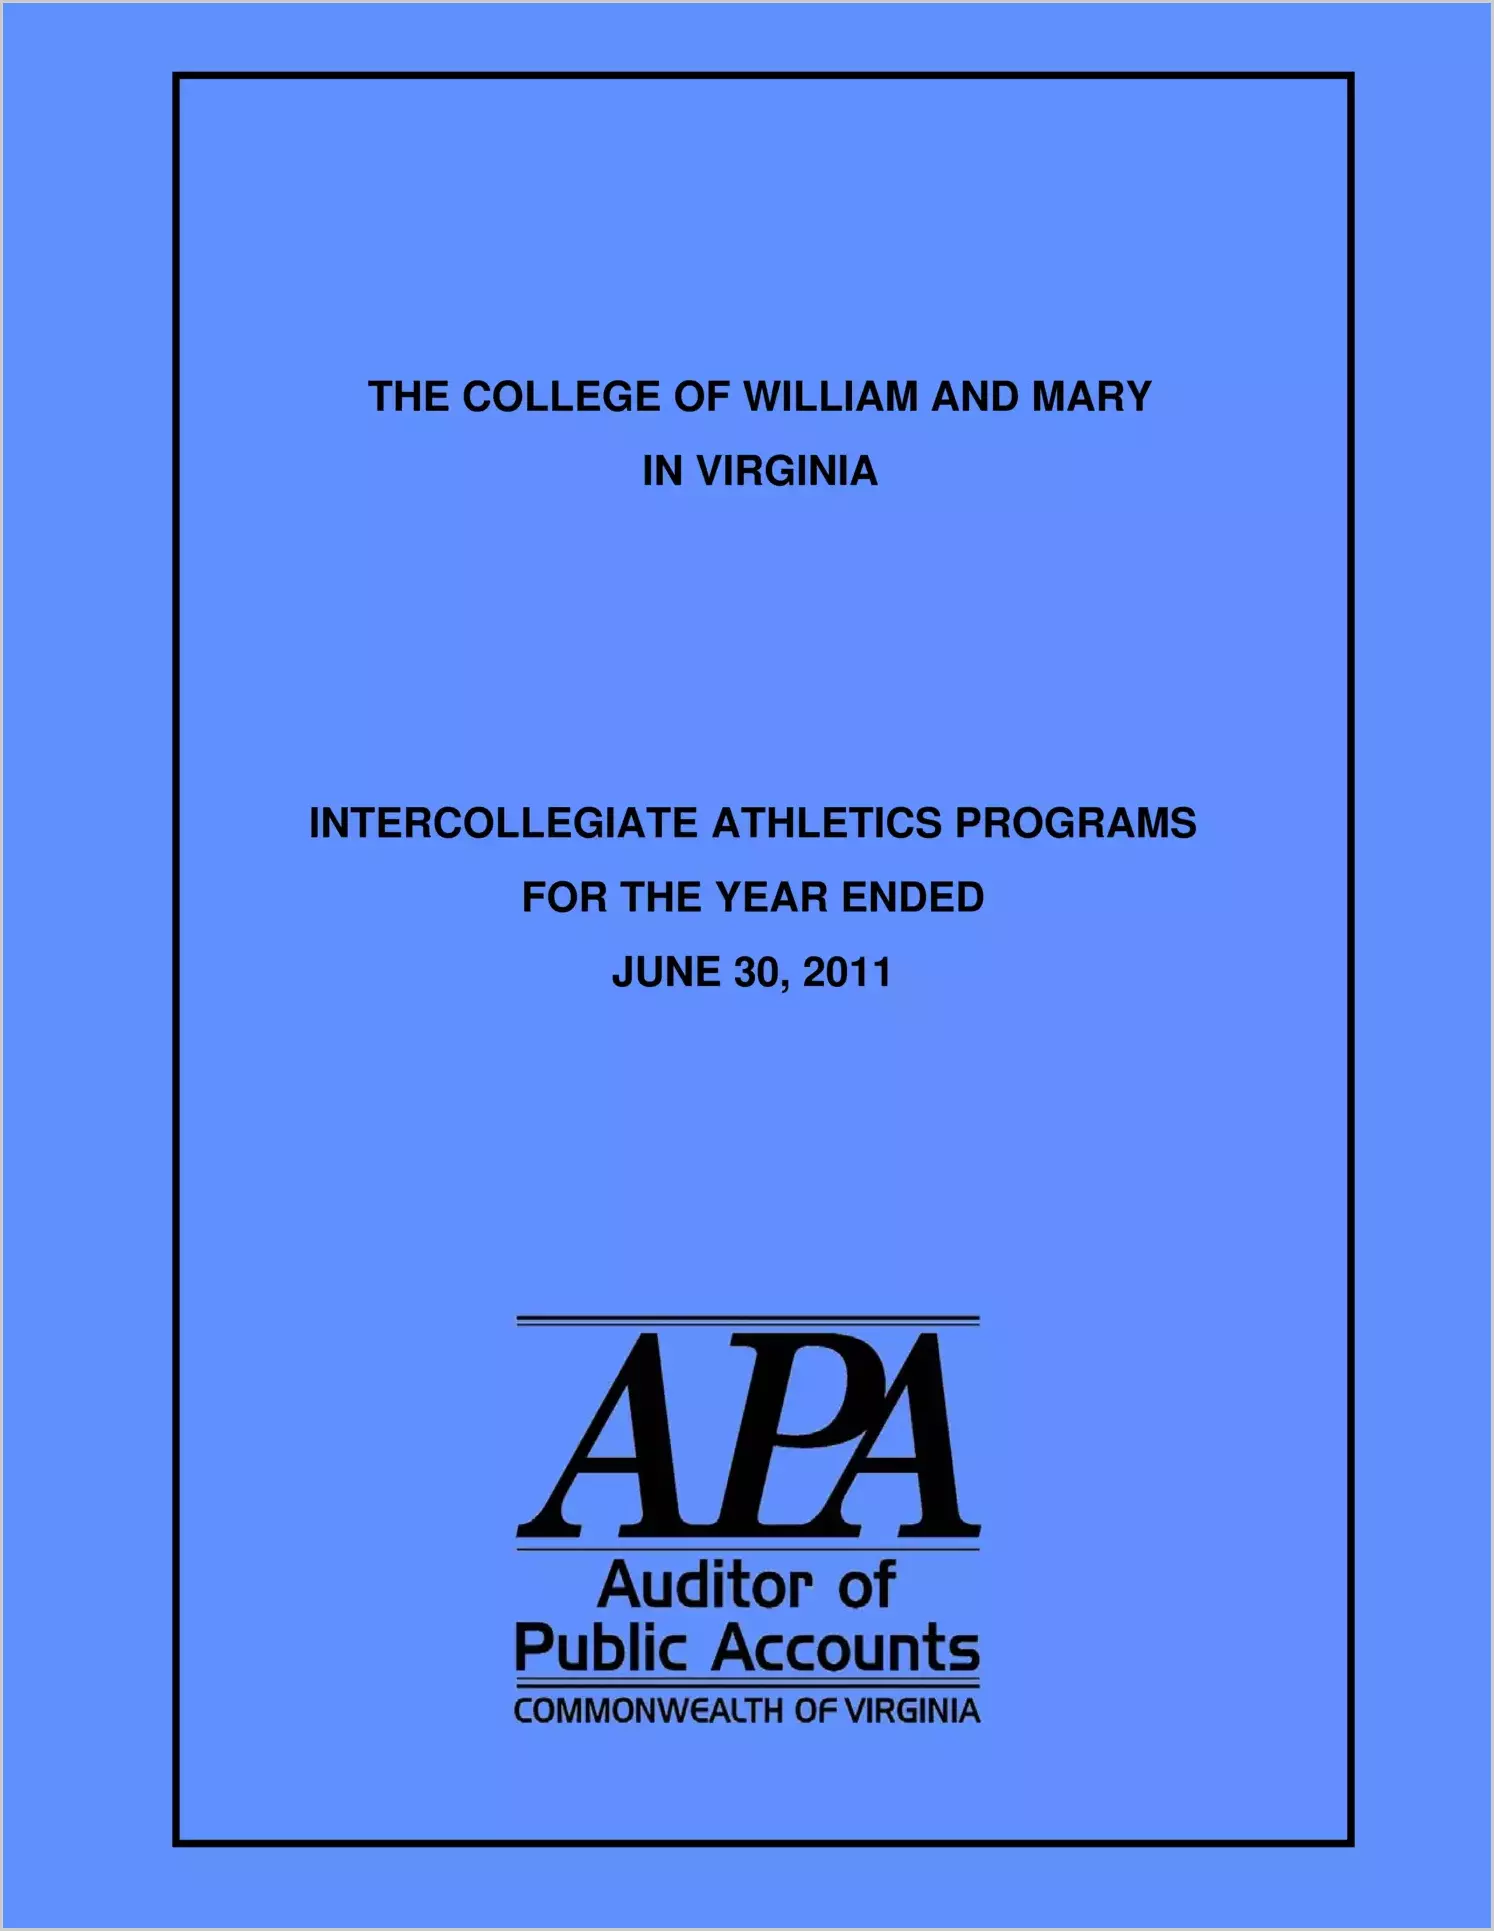 The College of William and Mary in Virginia Intercollegiate Athletics Programs for the year ended June 30, 2011